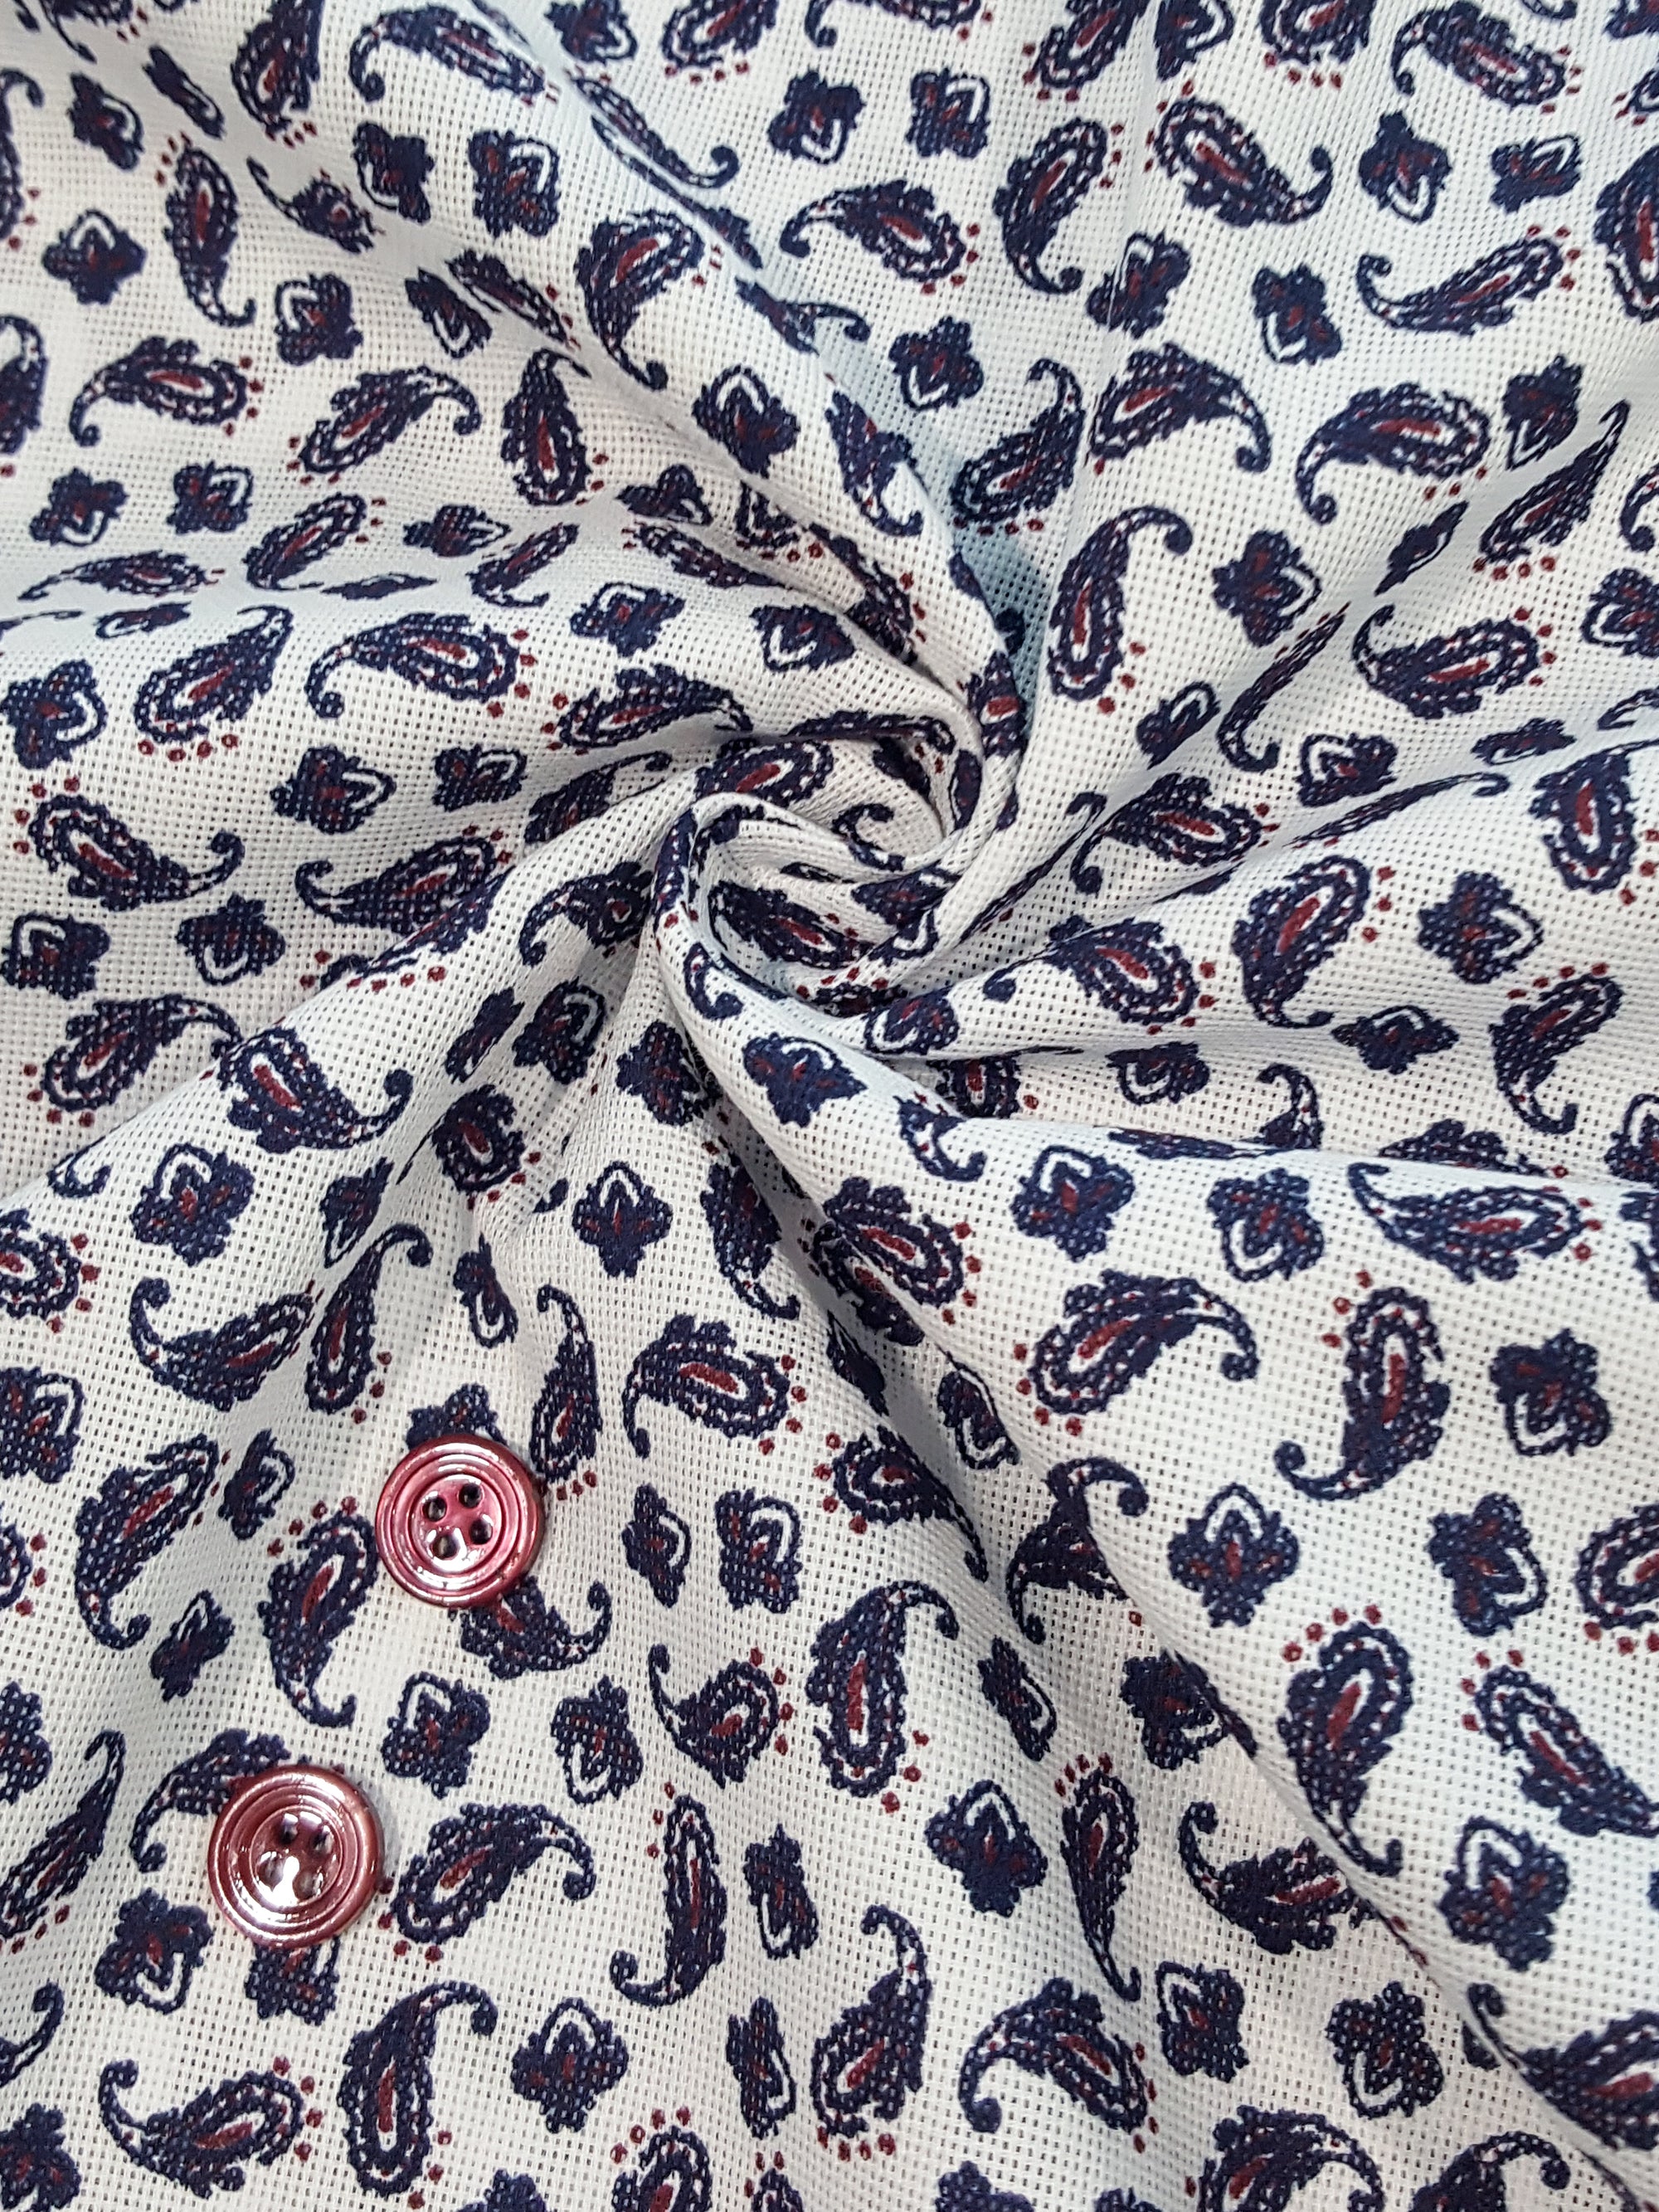 HUBERROSS 100% Oxford Panama Cotton Prints   Cloth Made In Italy Width: 58'' / 150cm  Available